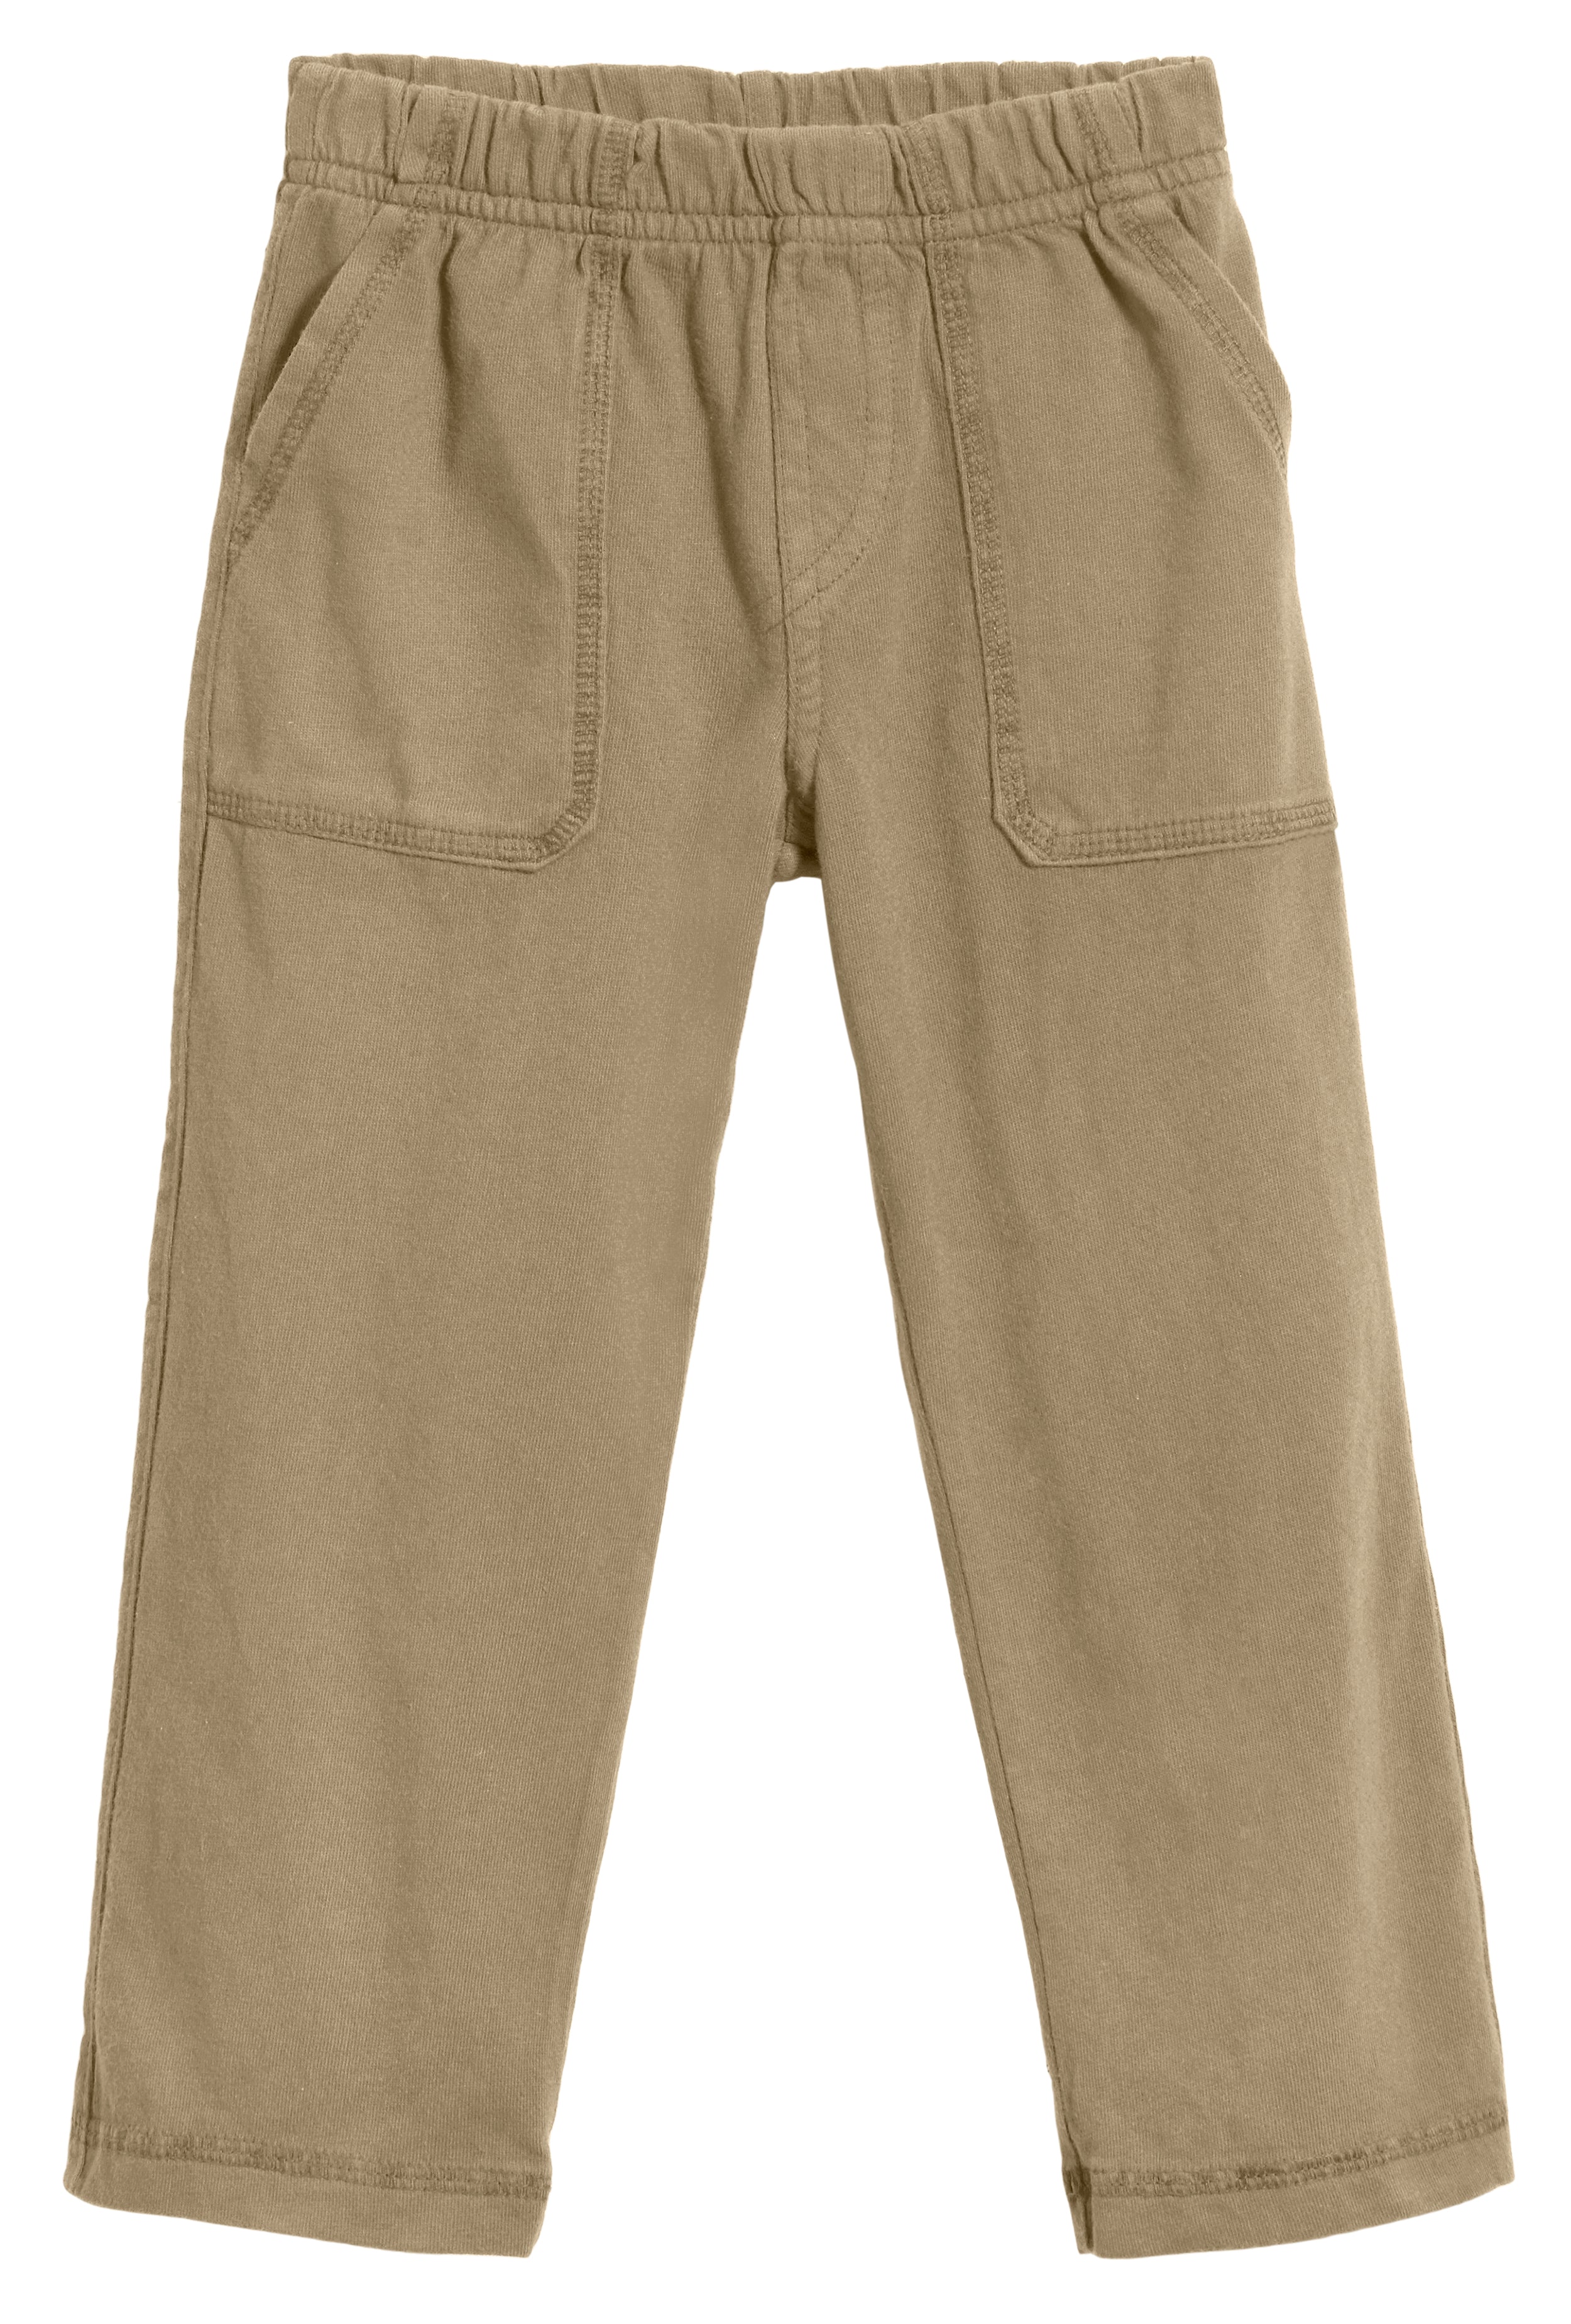 Spicy Kids Half Pant for Boys, 100% Cotton Shorts with Pockets (Khaki 506)